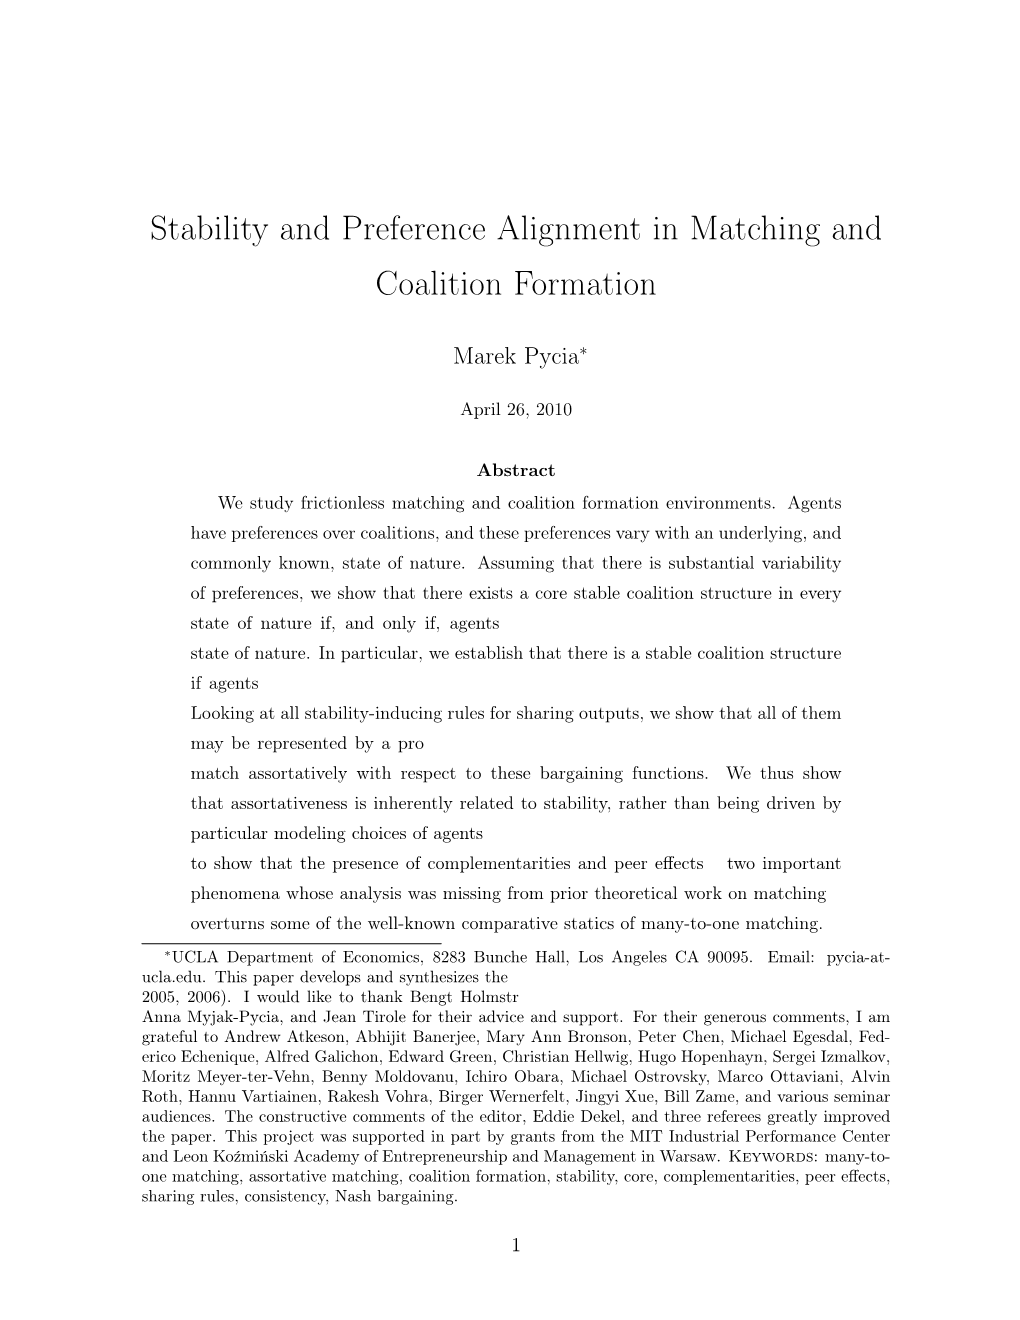 Stability and Preference Alignment in Matching and Coalition Formation